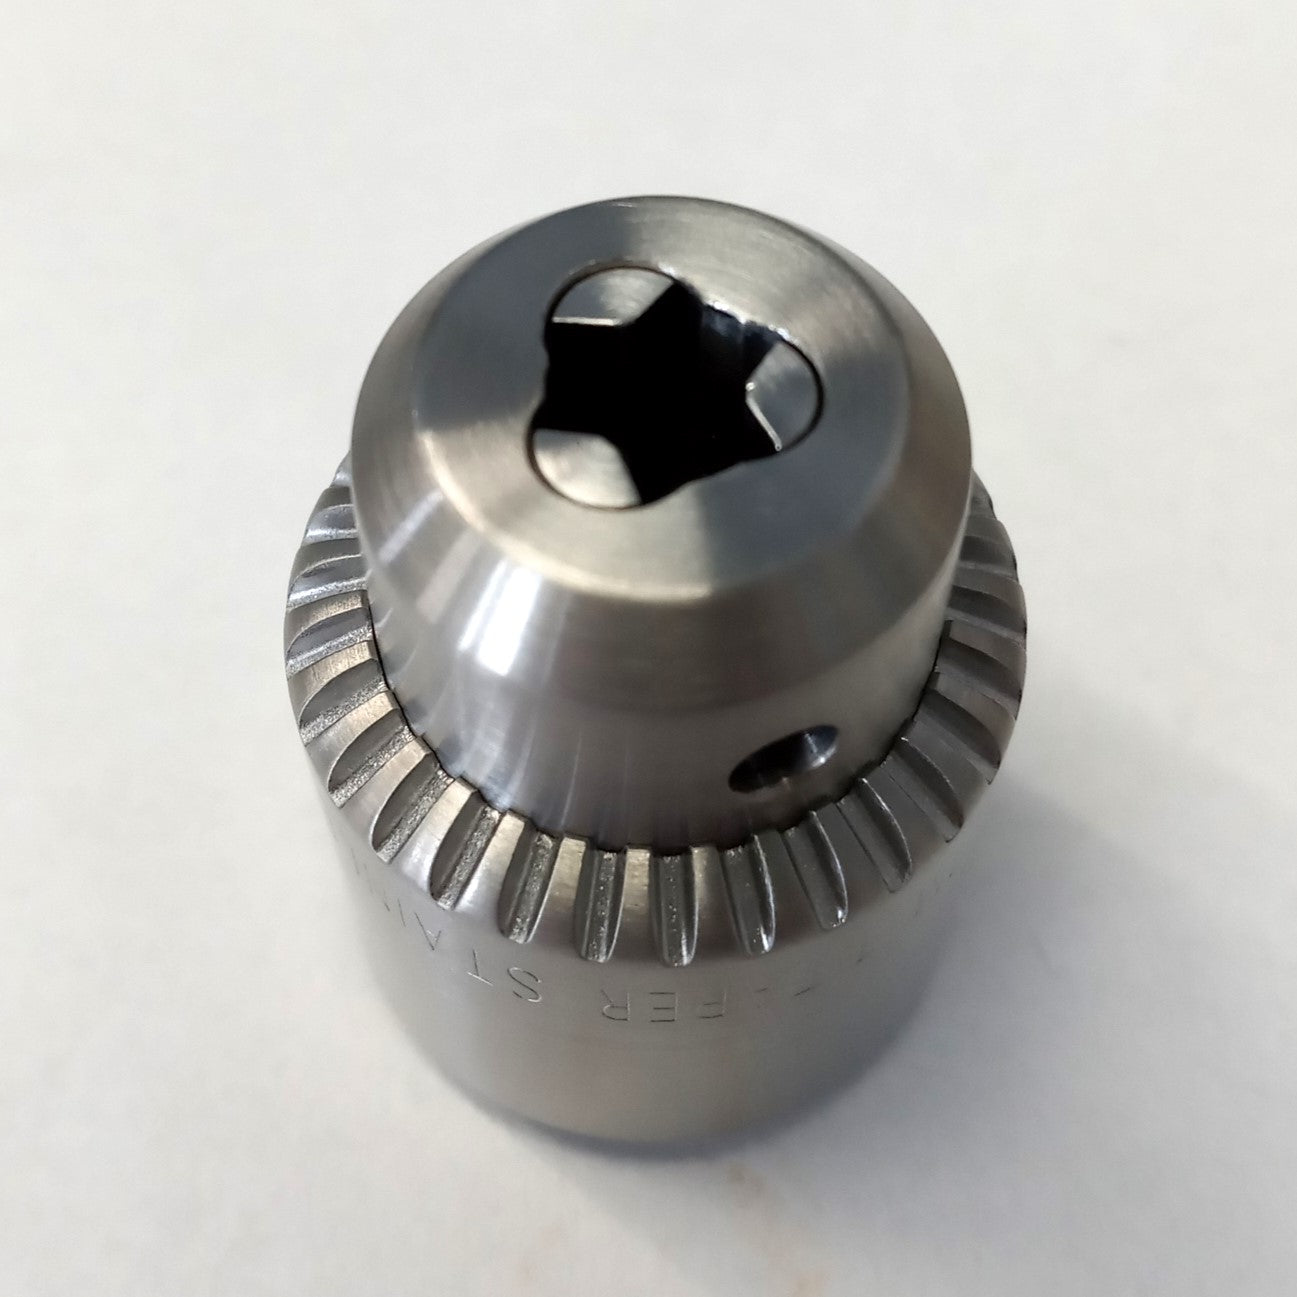 JACOBS 33338 1M 1 Taper Stainless Drill Chuck 1.1mm to 7.4mm Capacity